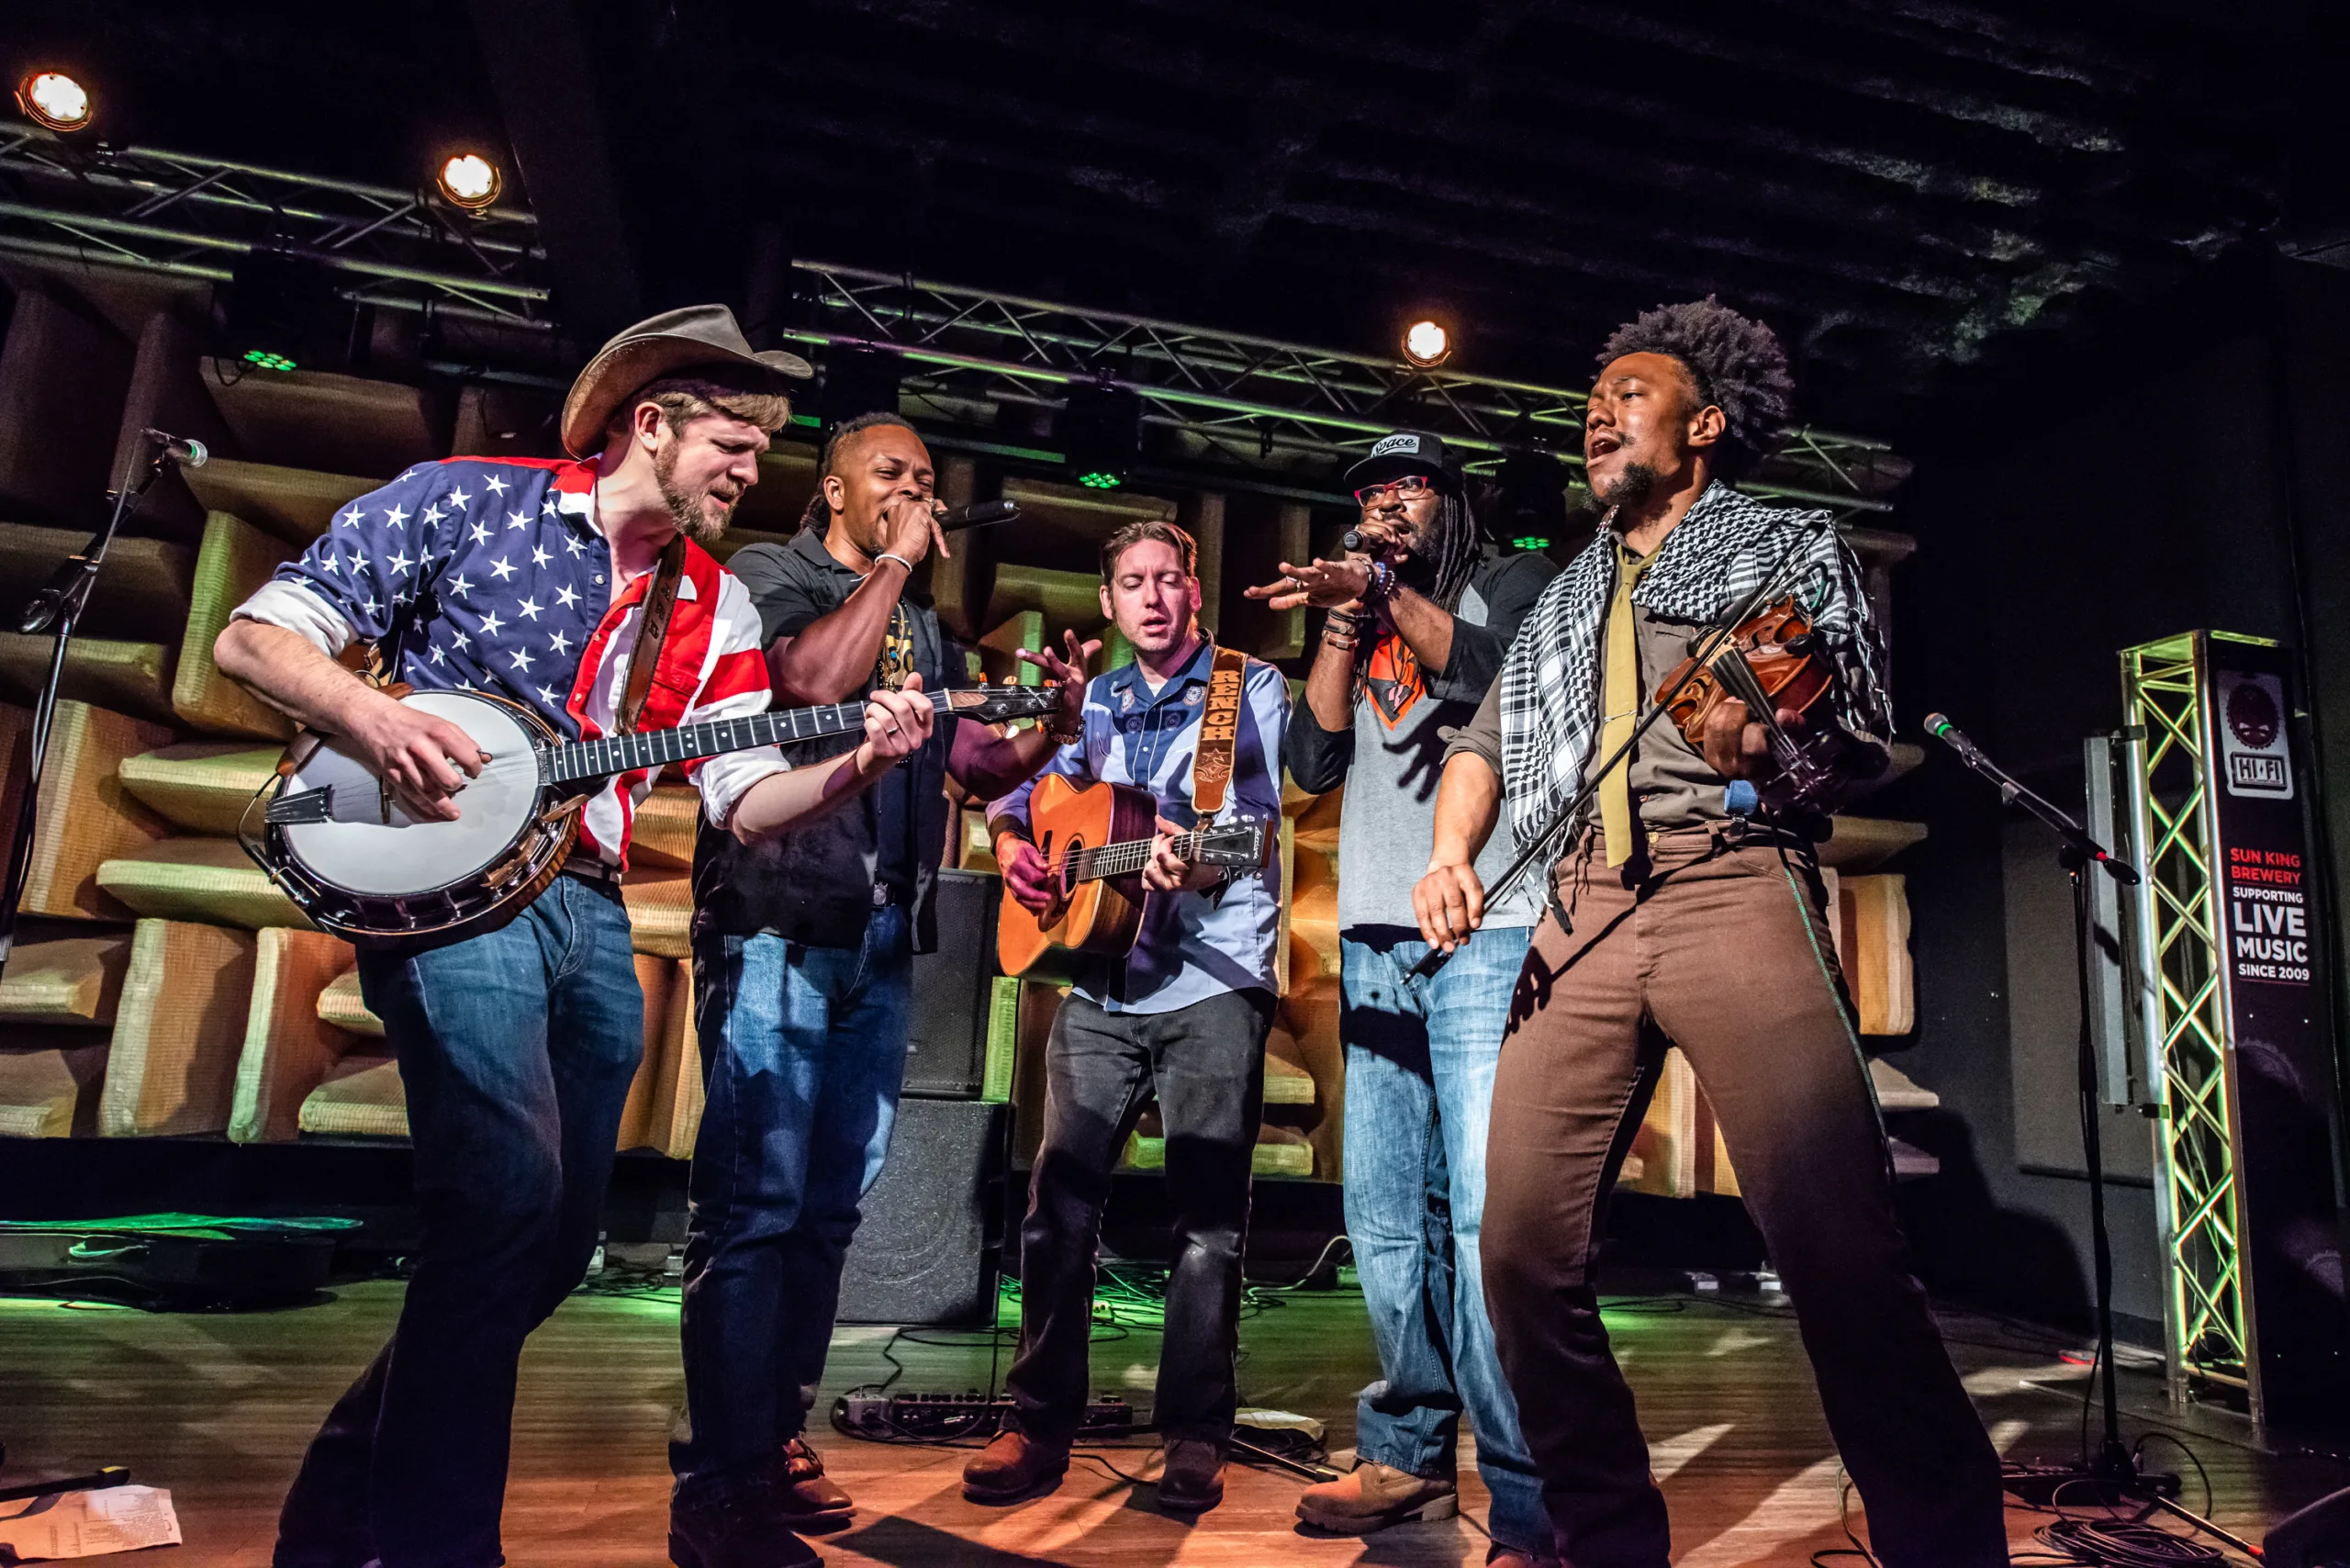 America’s Got Talent finalists, Gangstagrass. Their music is a lively combination of hip hop, bluegrass, and rap. They entranced stage one